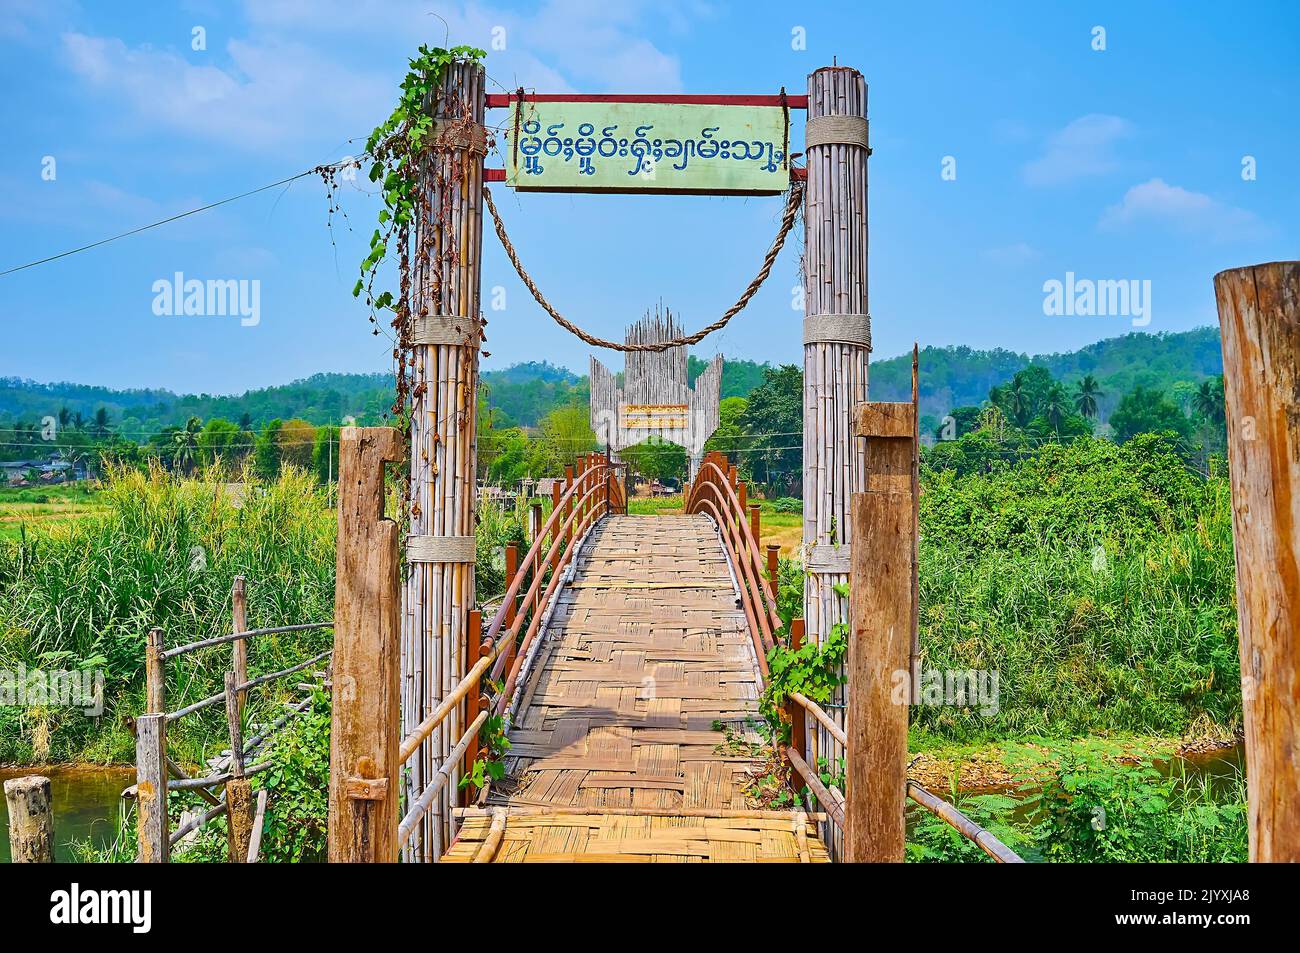 MAE HONG SON, THAILAND - MAY 6, 2019: Decorative gate of the old Su Tong Pae Bamboo Bridge, surrounded with agricultural lands of Pang Mu, on May 6 in Stock Photo